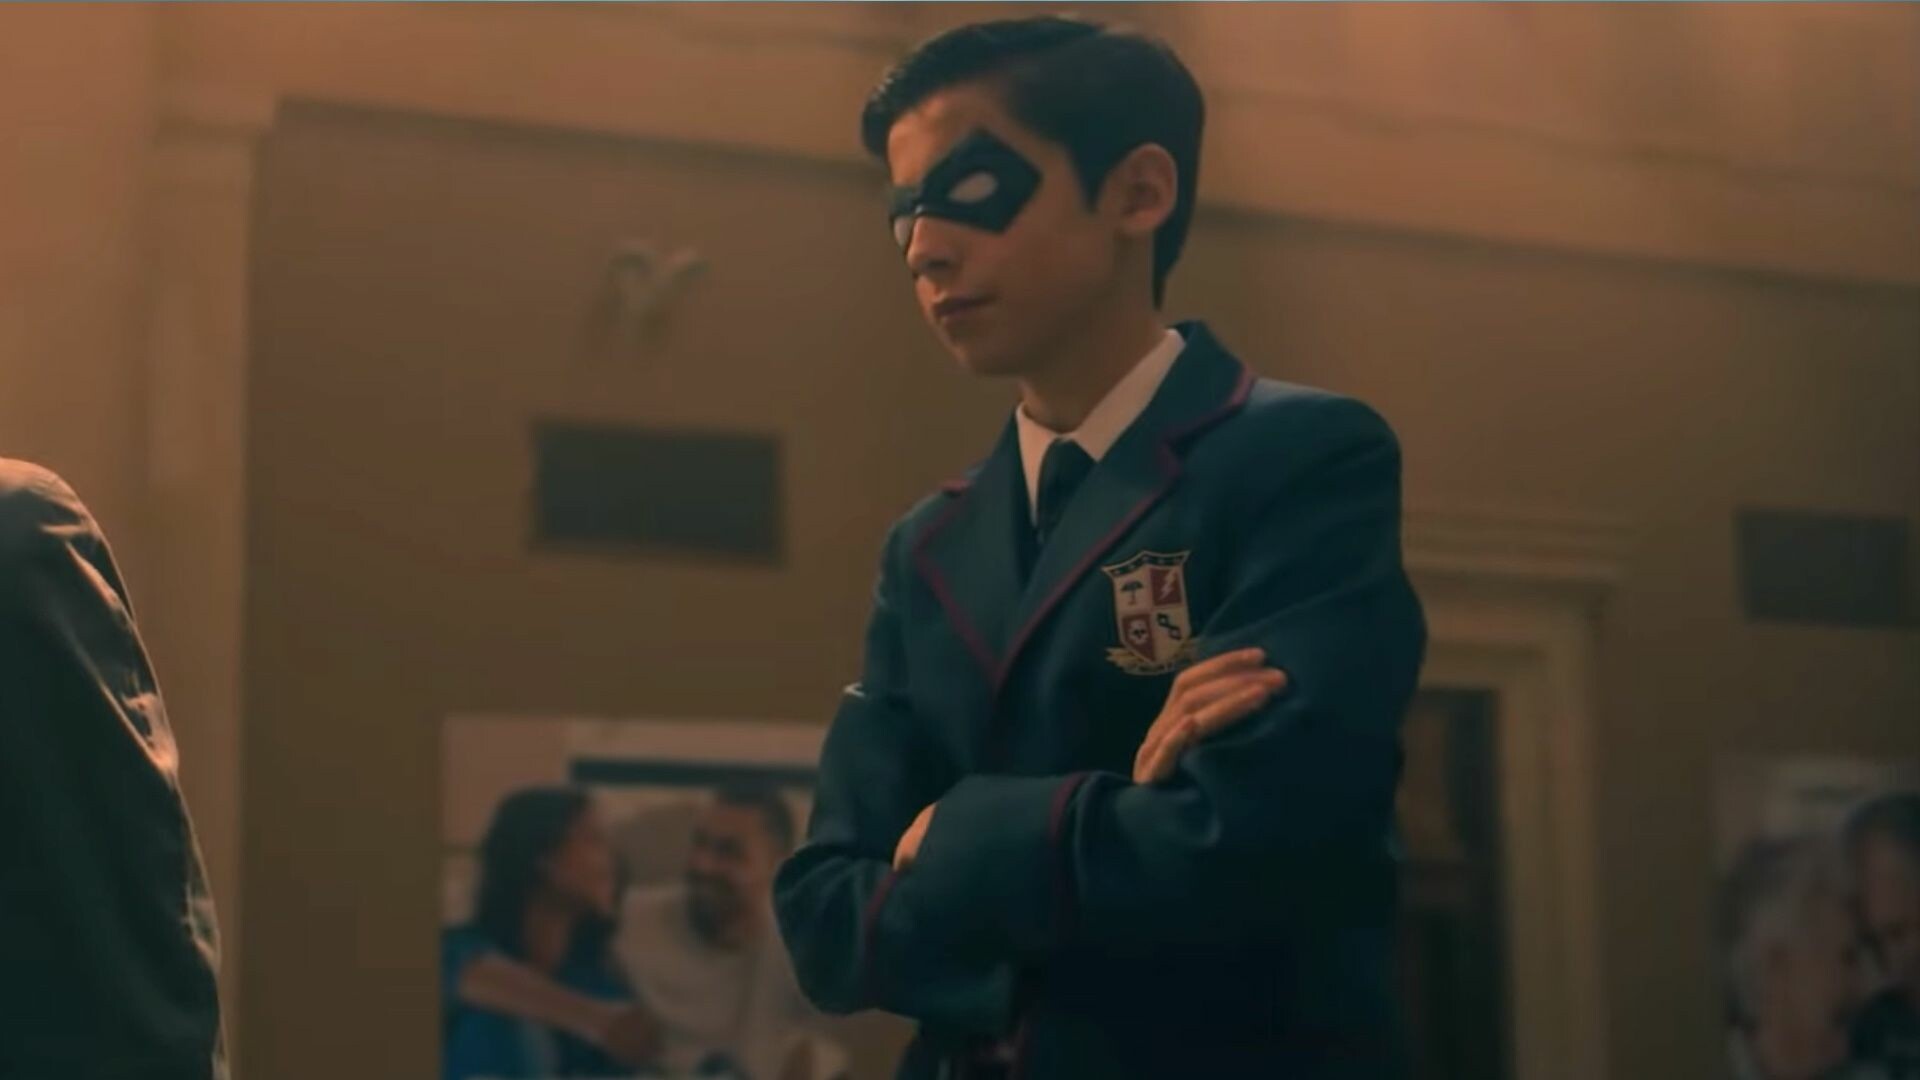 The Umbrella Academy: Aidan Gallagher, Starring as a character Number Five. 1920x1080 Full HD Wallpaper.